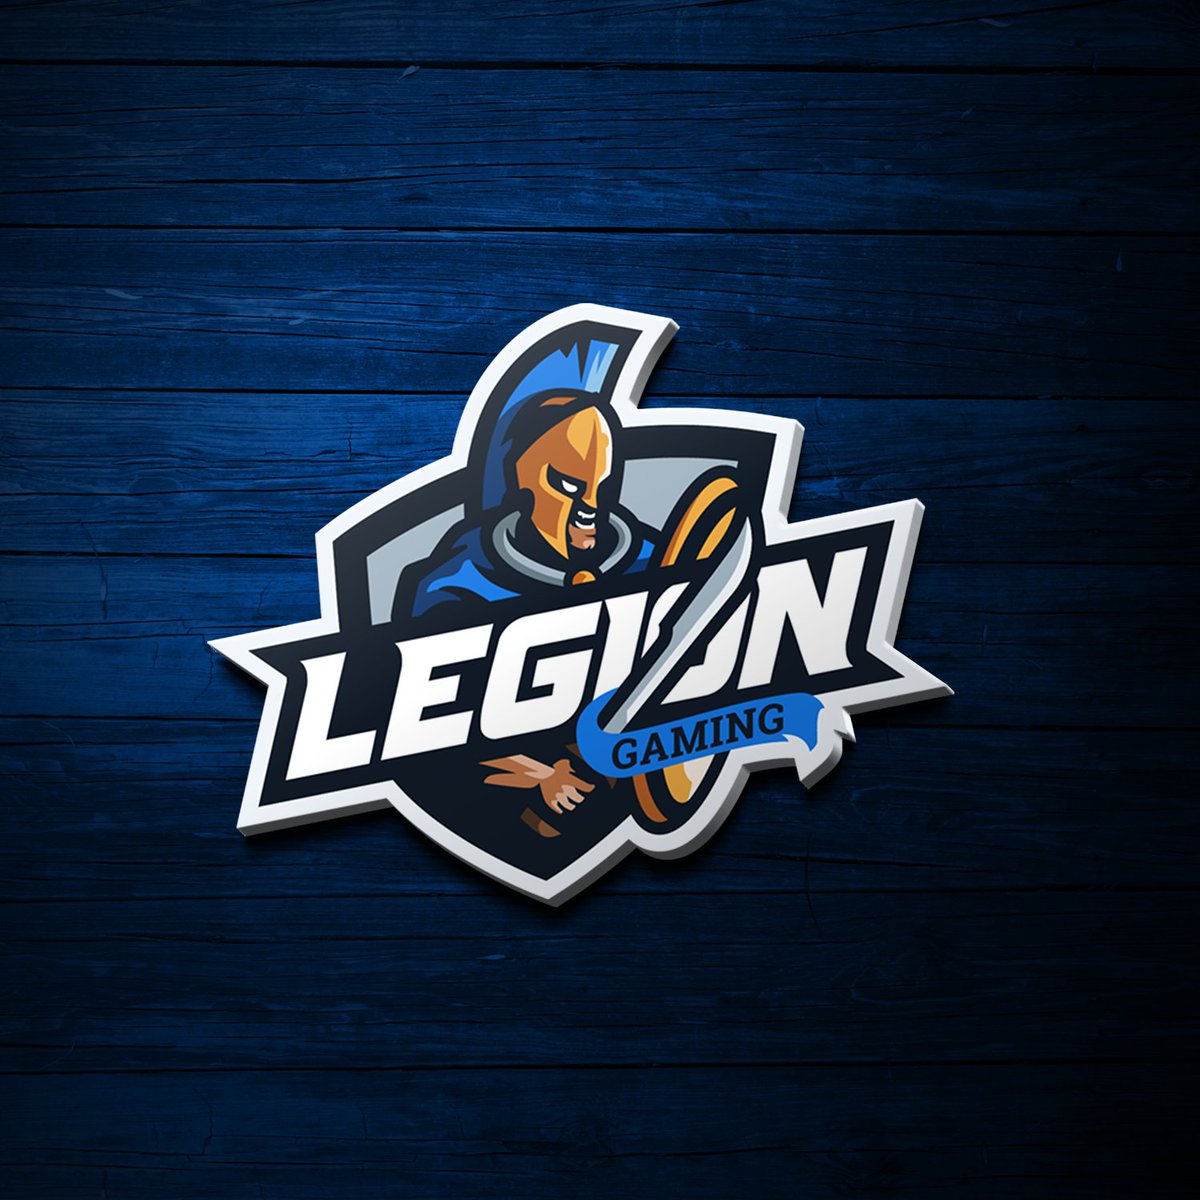 Embrace the legacy of strength and honor with our noble knight mascot, proudly representing the indomitable spirit of the Legion. 🛡️⚔️ #LegionLegacy #Wednesday #emilywilson #Logo #graphicdesign #mascotlogo #gaminglogo #gaming #twitch